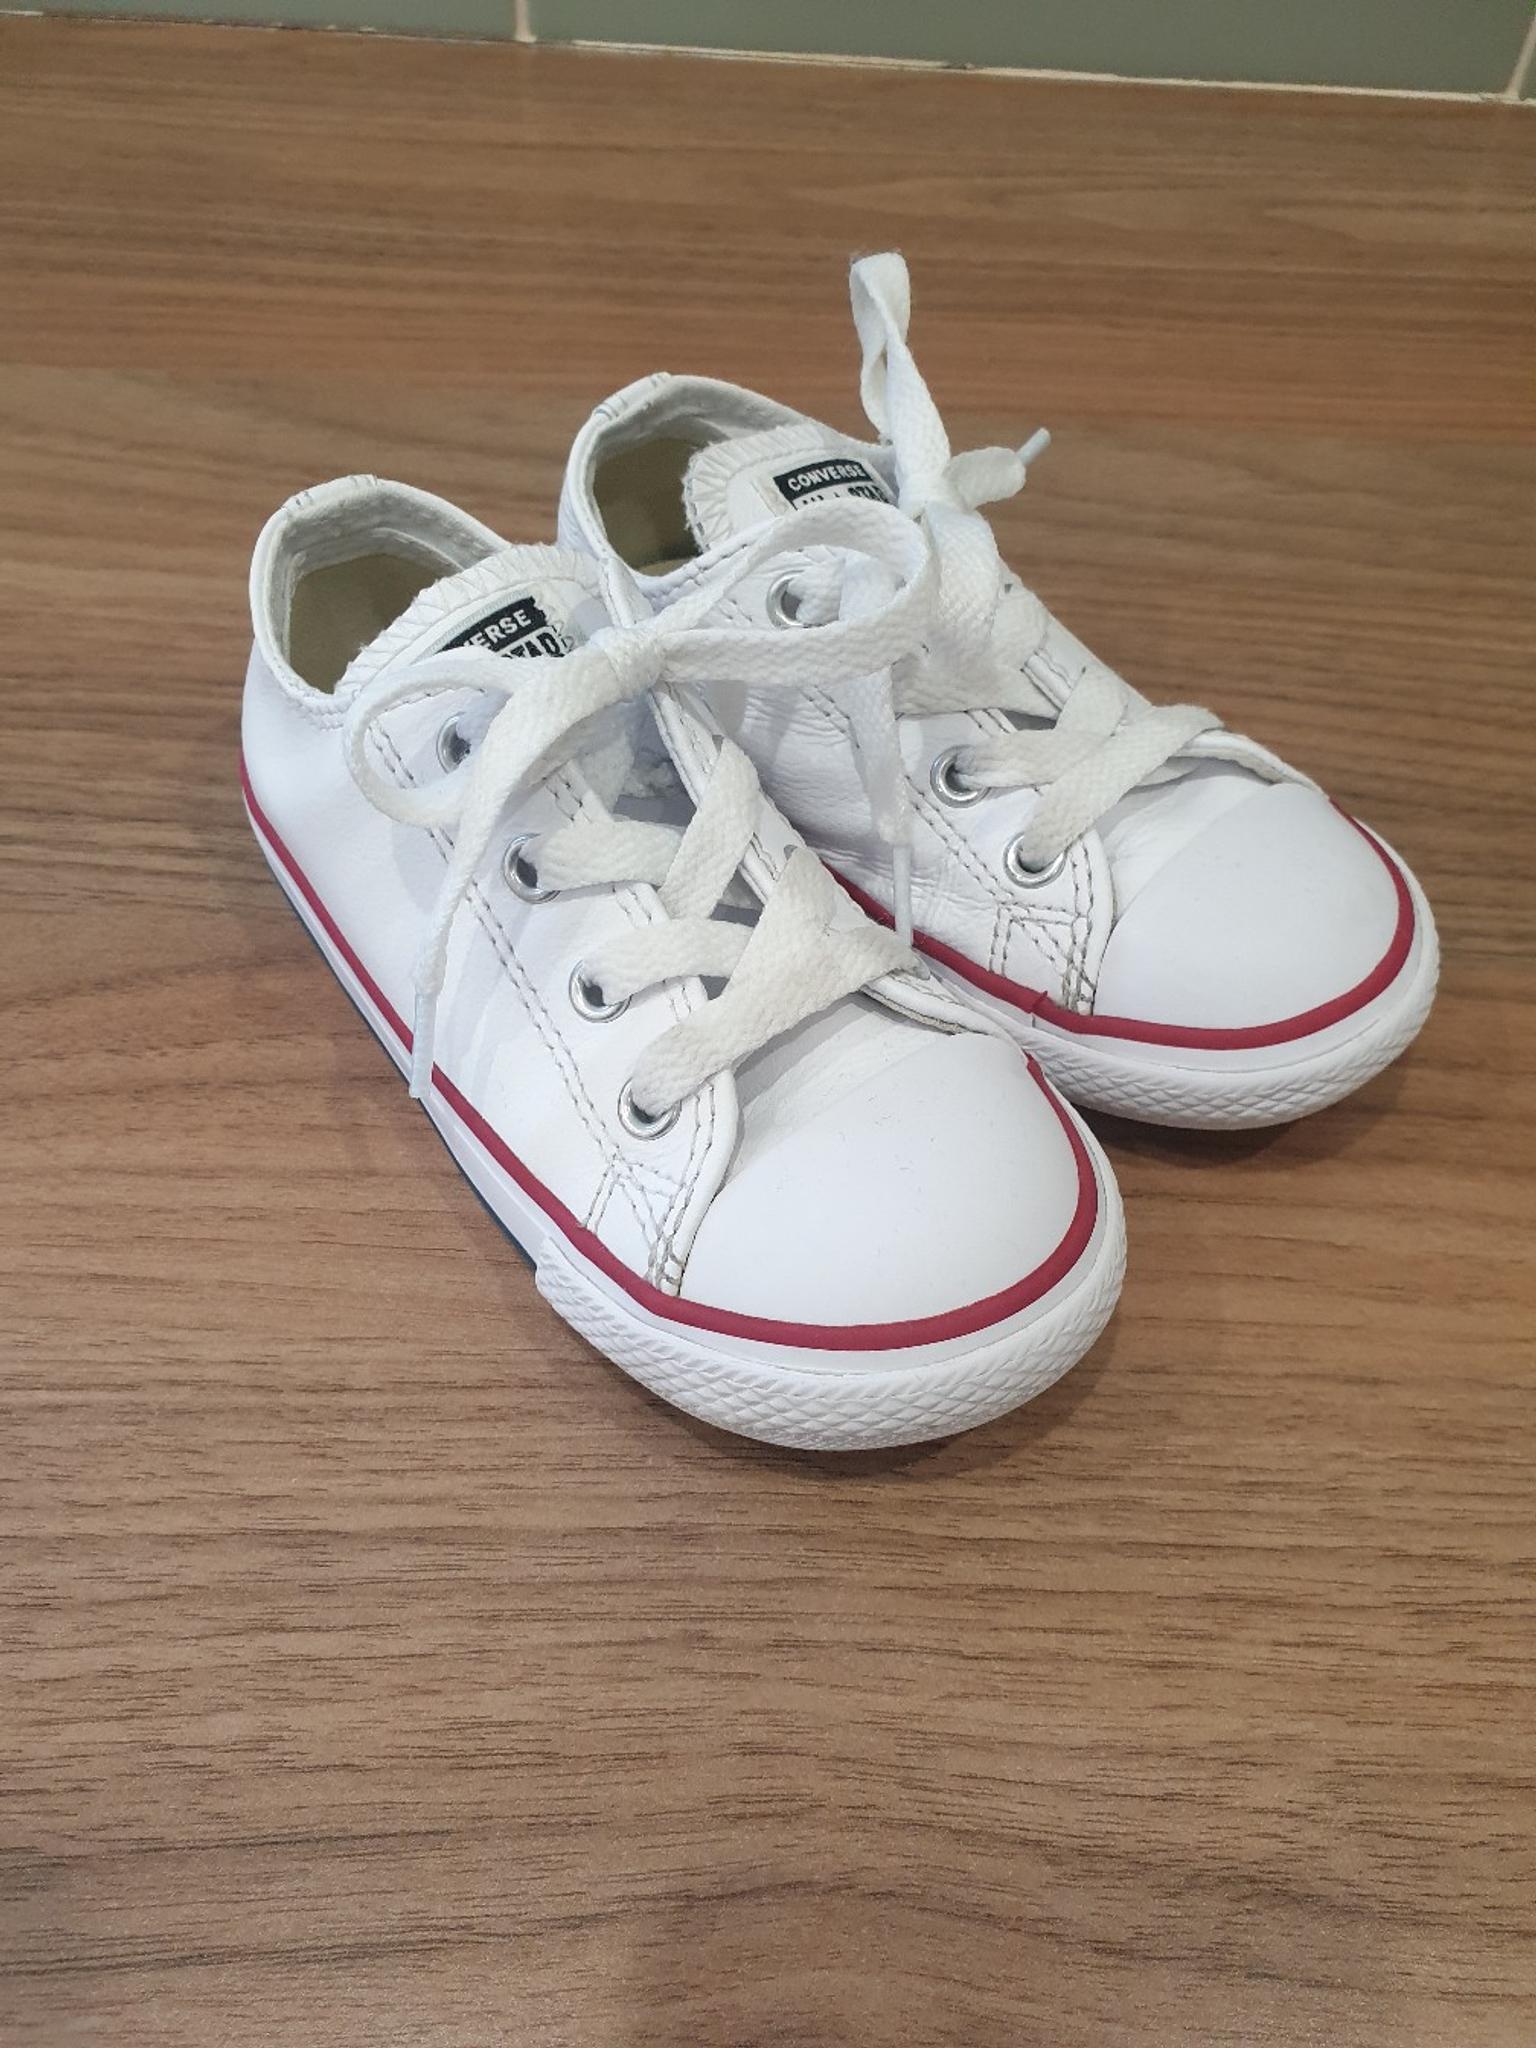 infant leather converse size 8, OFF 74 